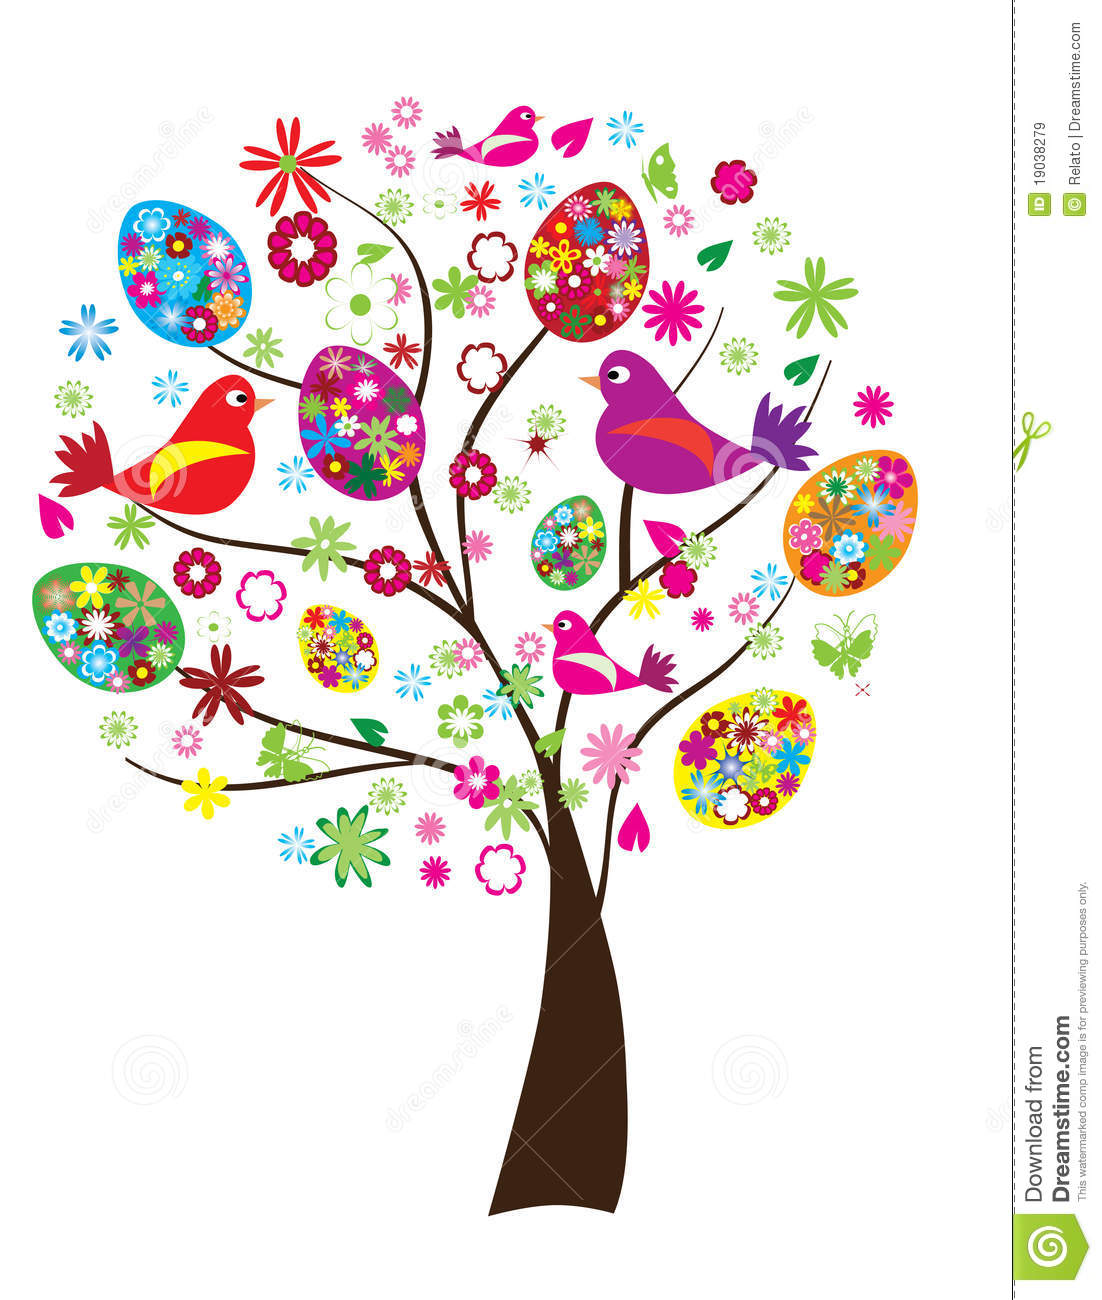 Easter Tree Royalty Free Stock Images   Image  19038279